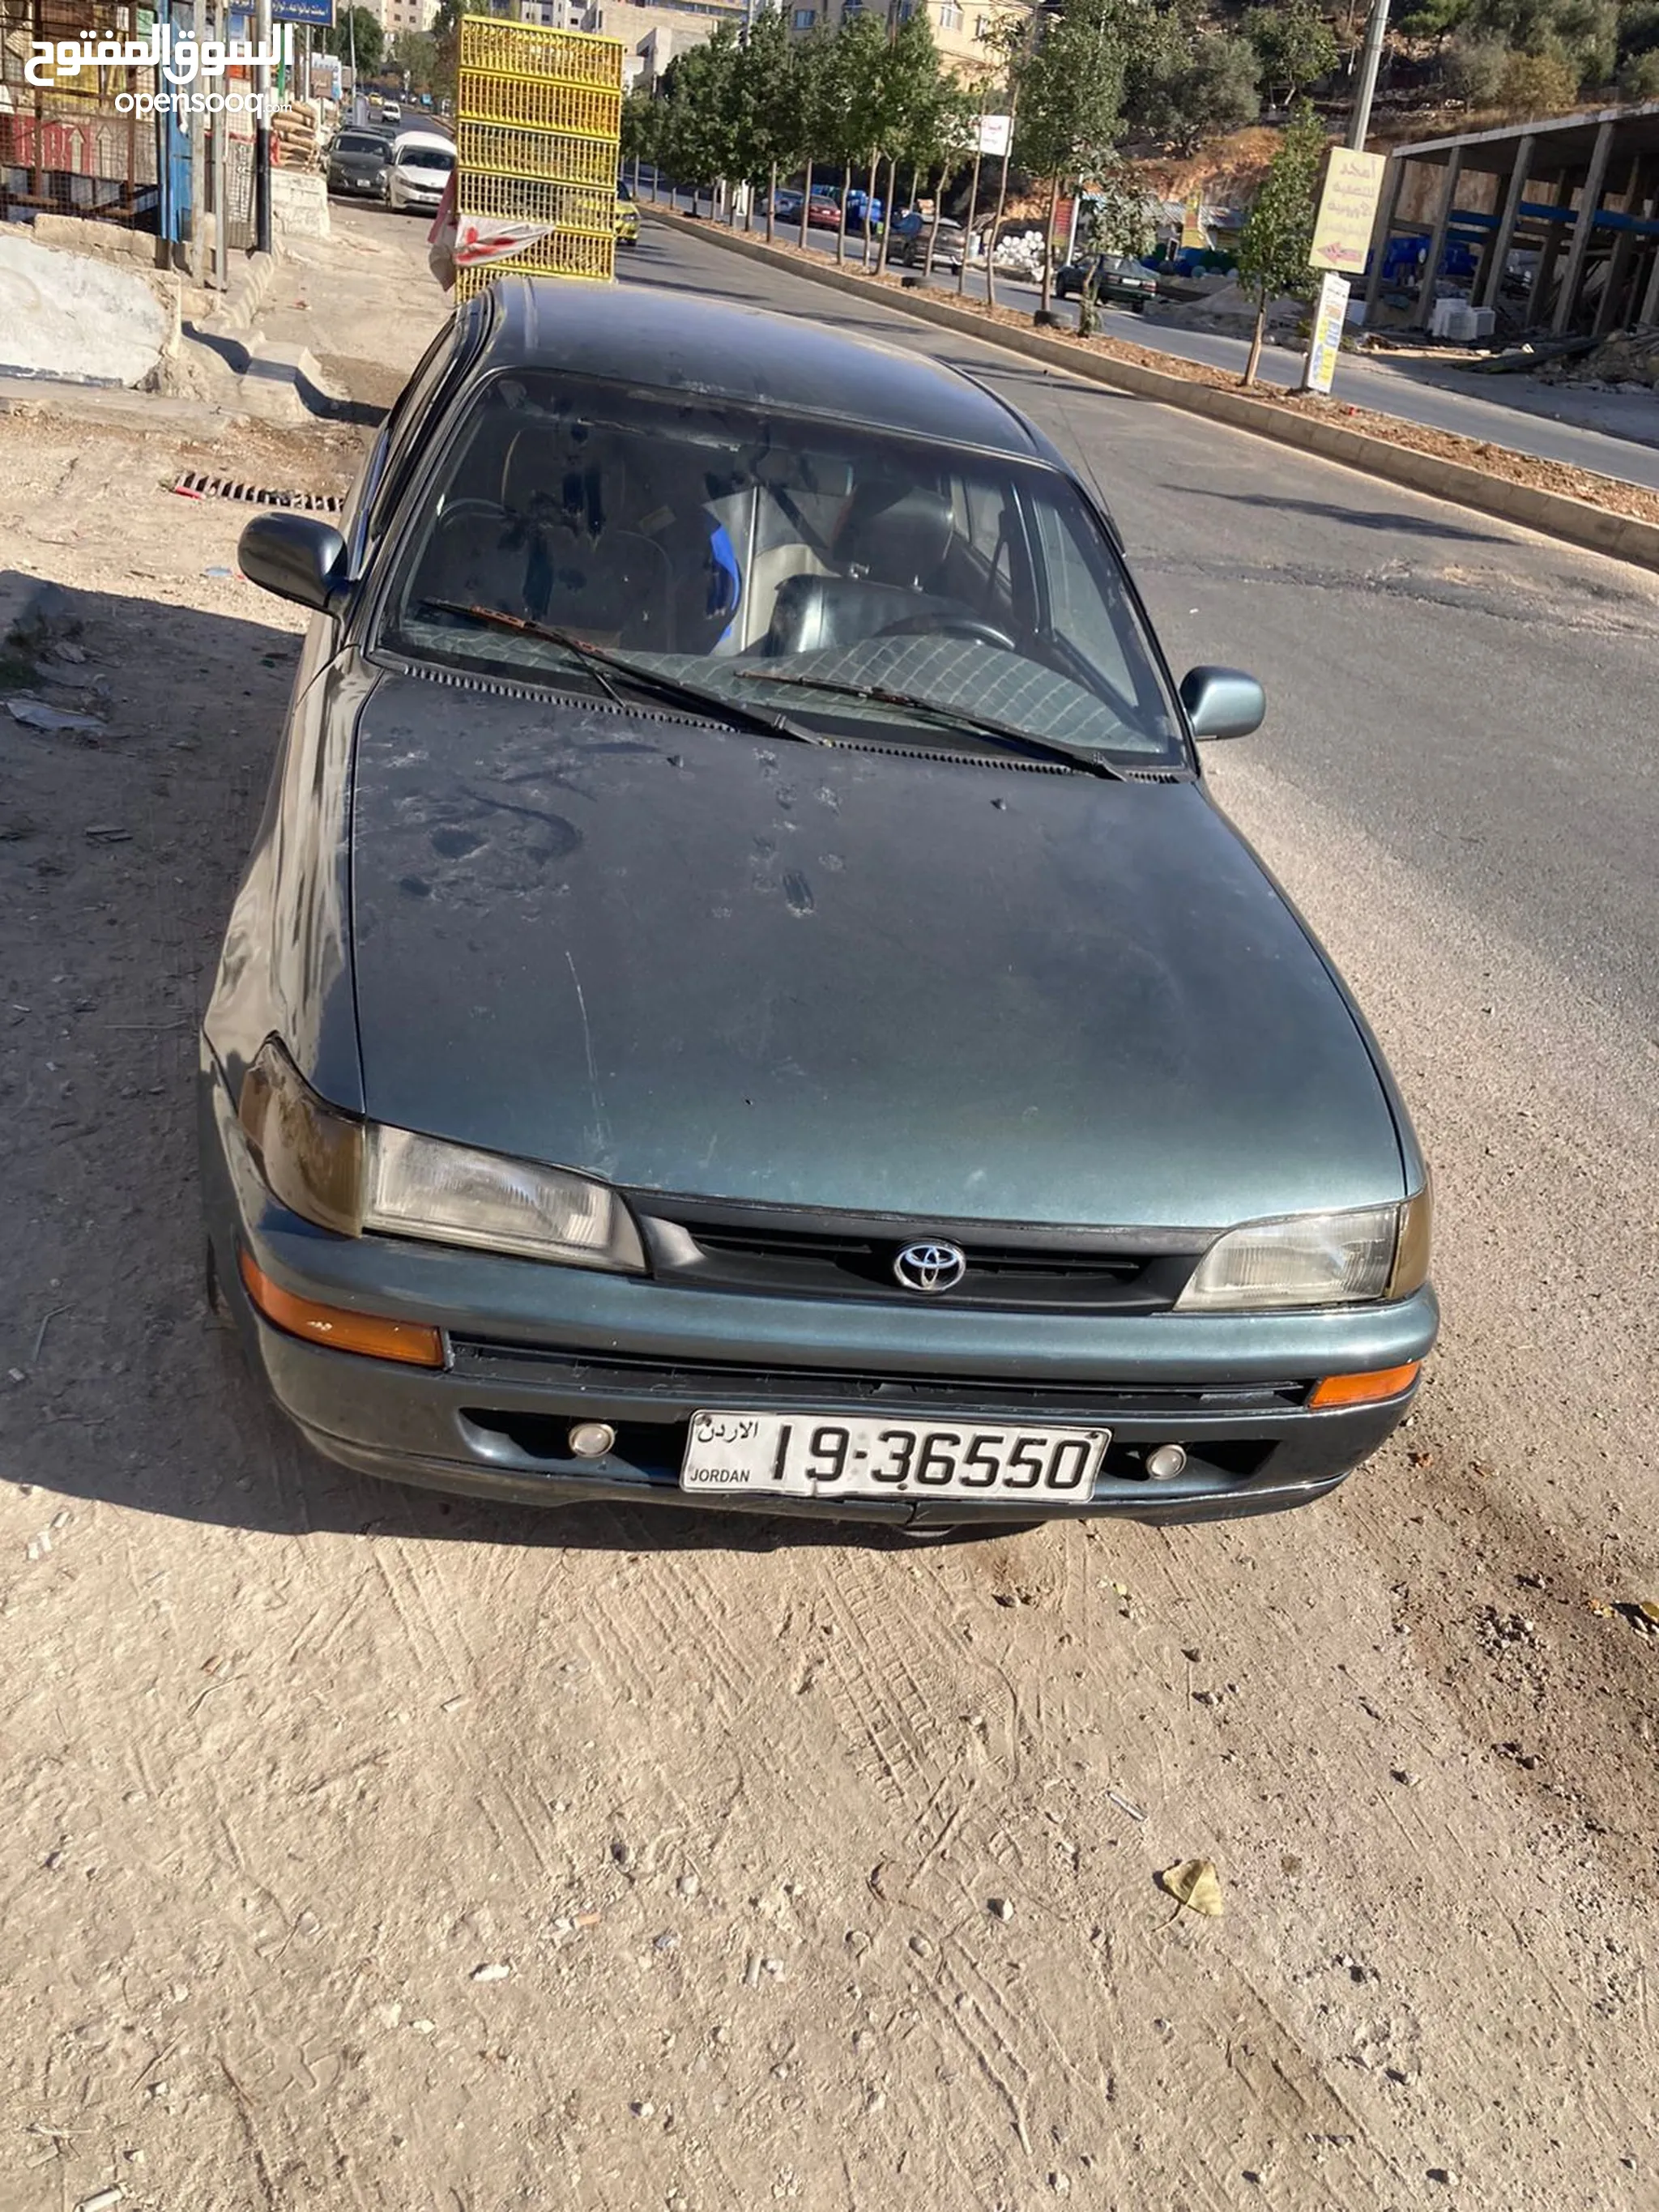 Toyota Corolla 1993 Cars for Sale in Jordan : Best Prices : Corolla 1993 :  New & Used